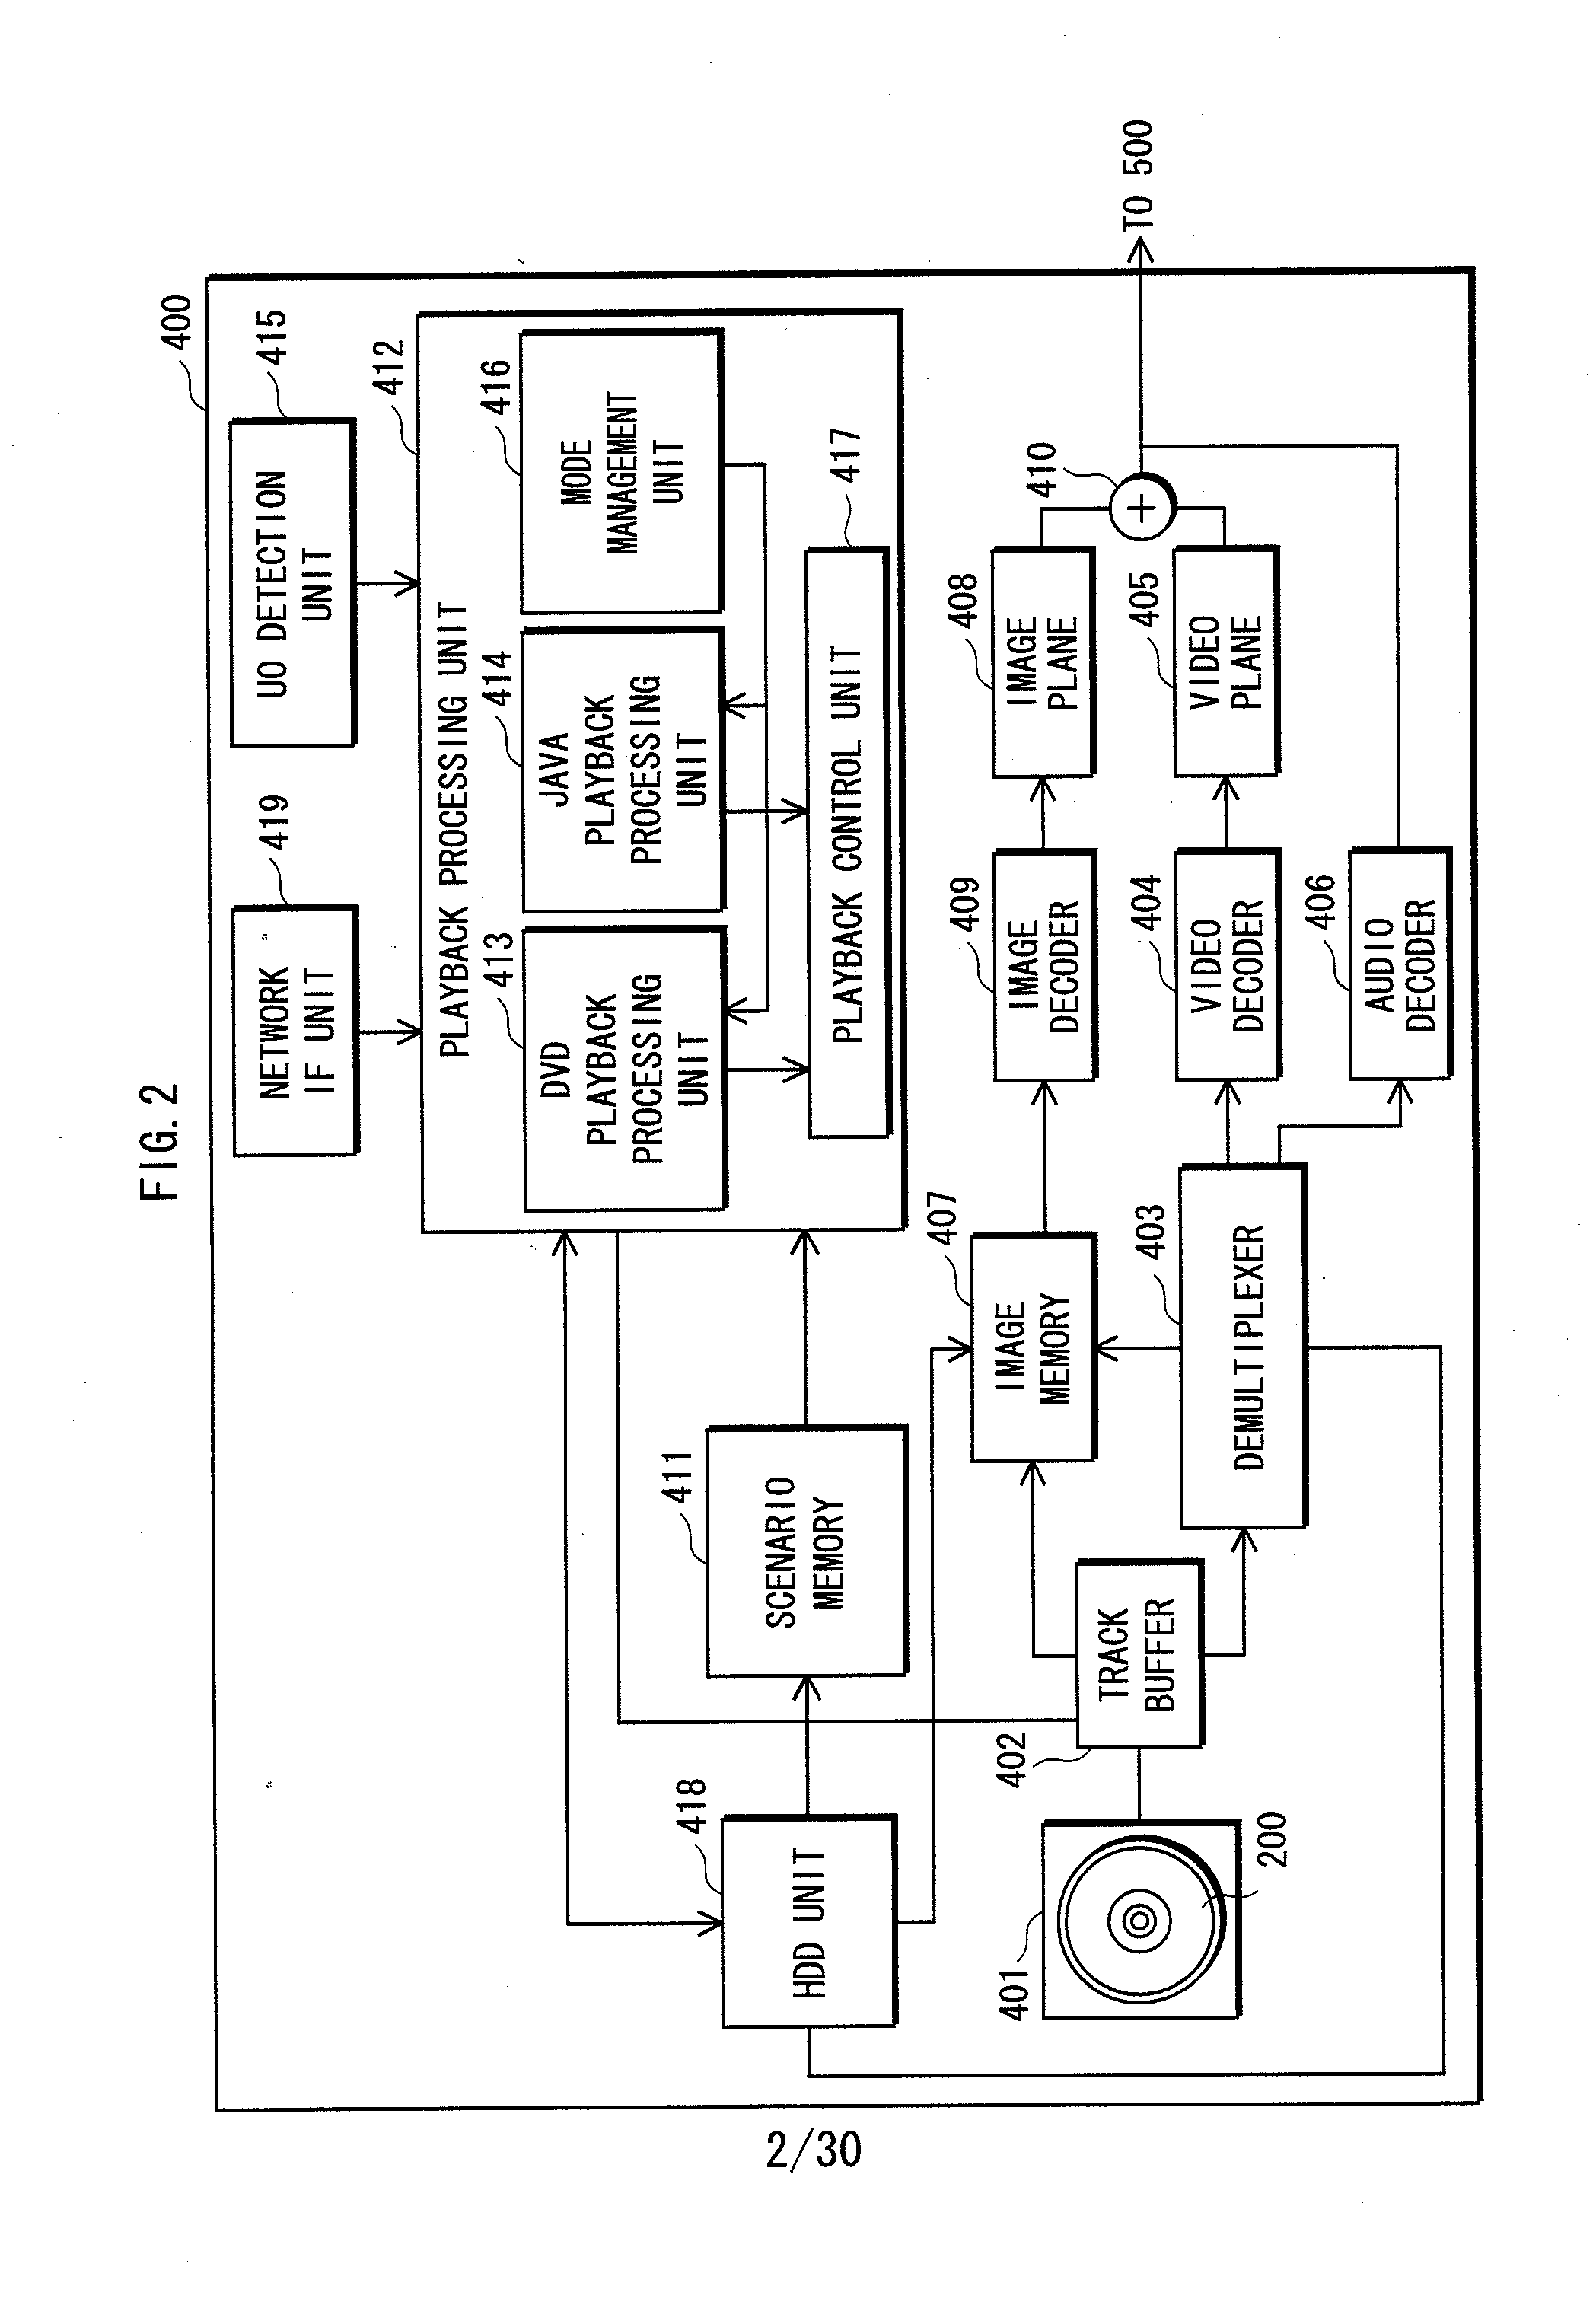 Reproduction Device, Reproduction Method, Program, and Computer-Readable Recording Medium